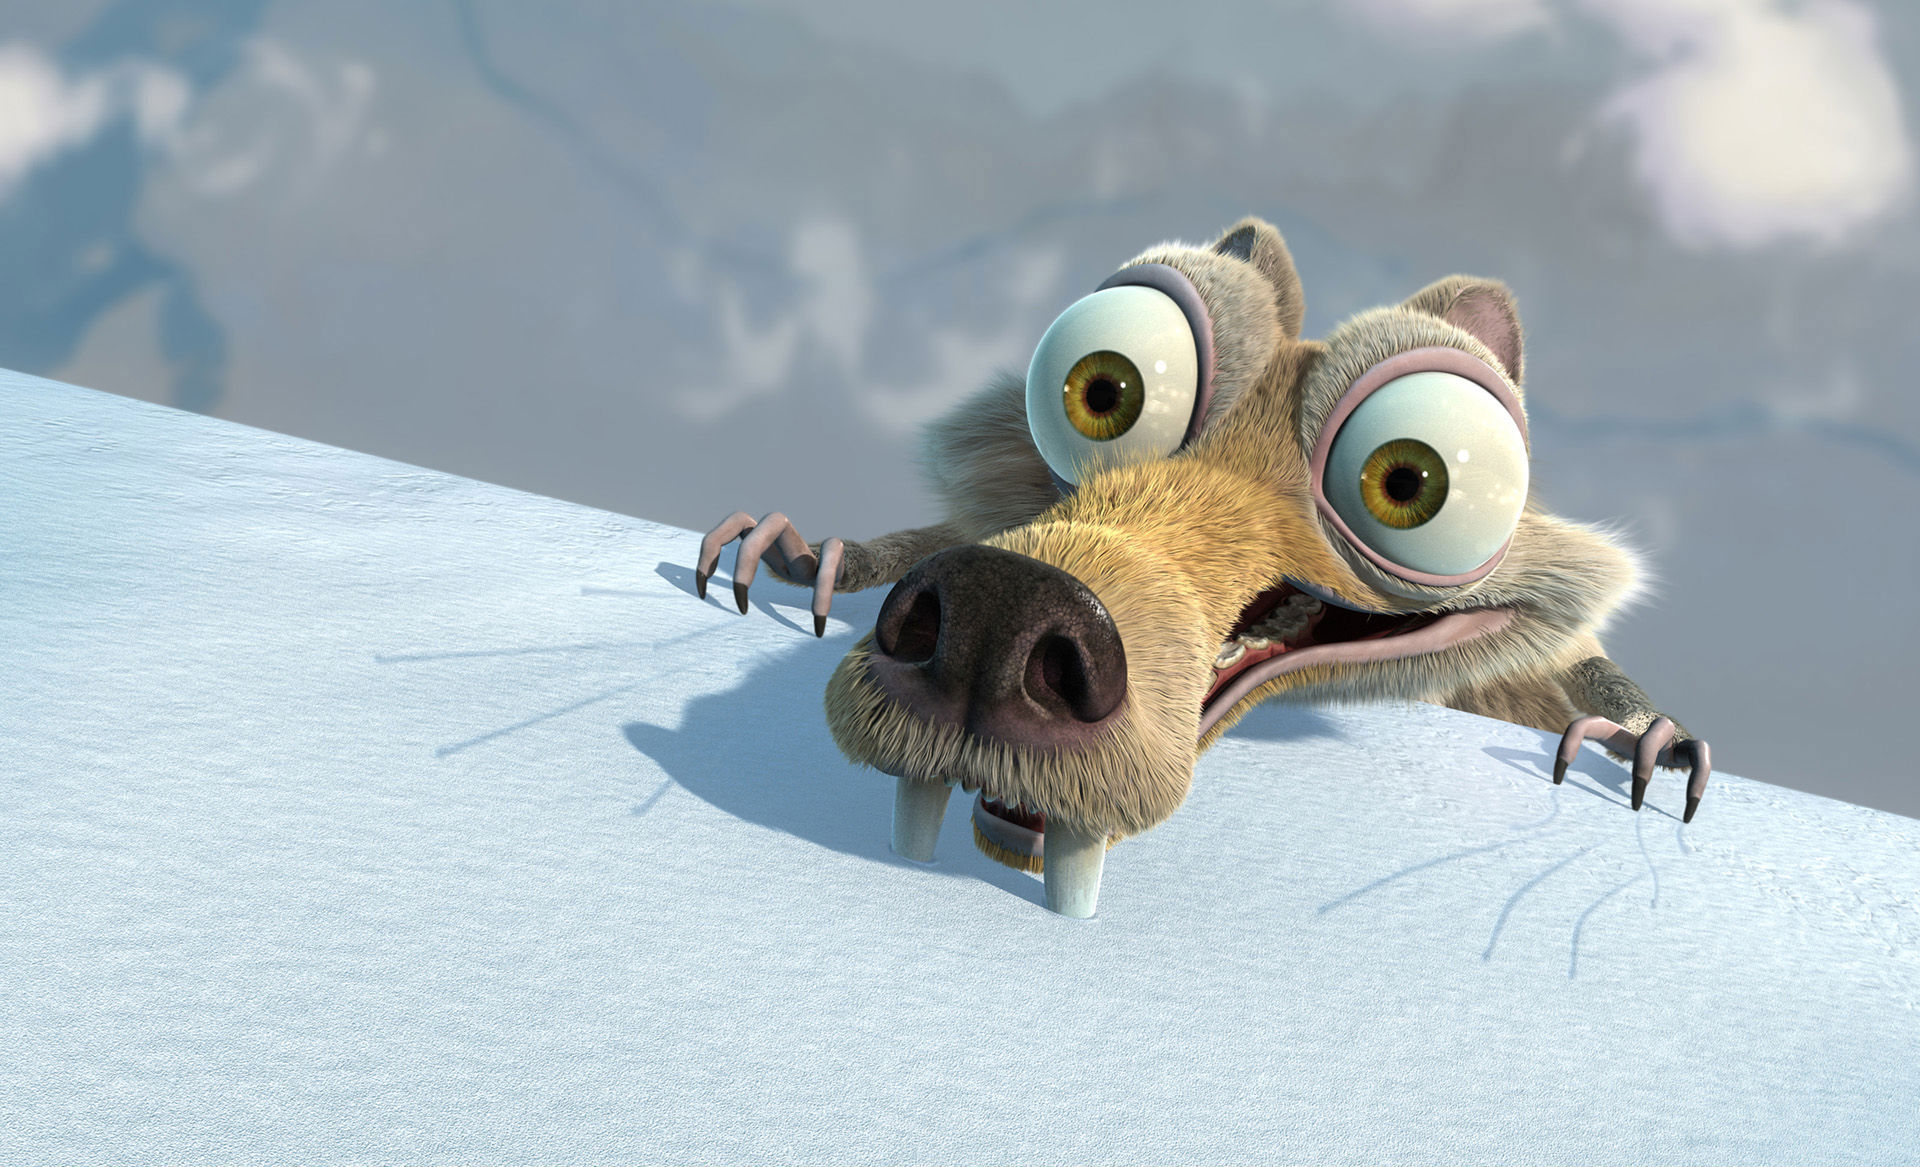 ice age, movie, ice age: dawn of the dinosaurs